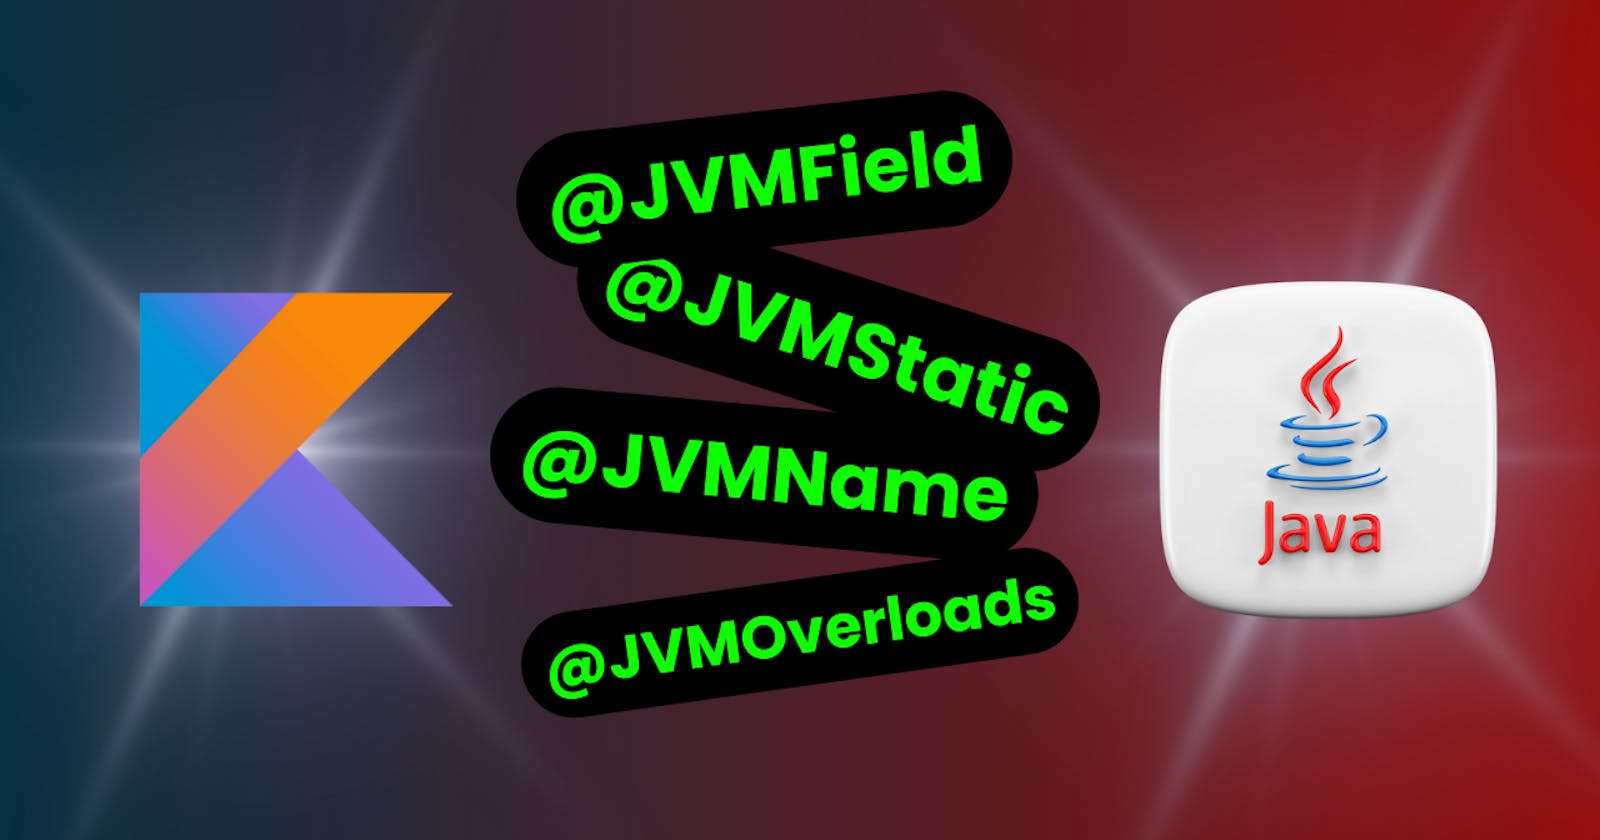 Everything about JVMField, JVMOverloads, JVMName, and JVMStatic annotations in Kotlin